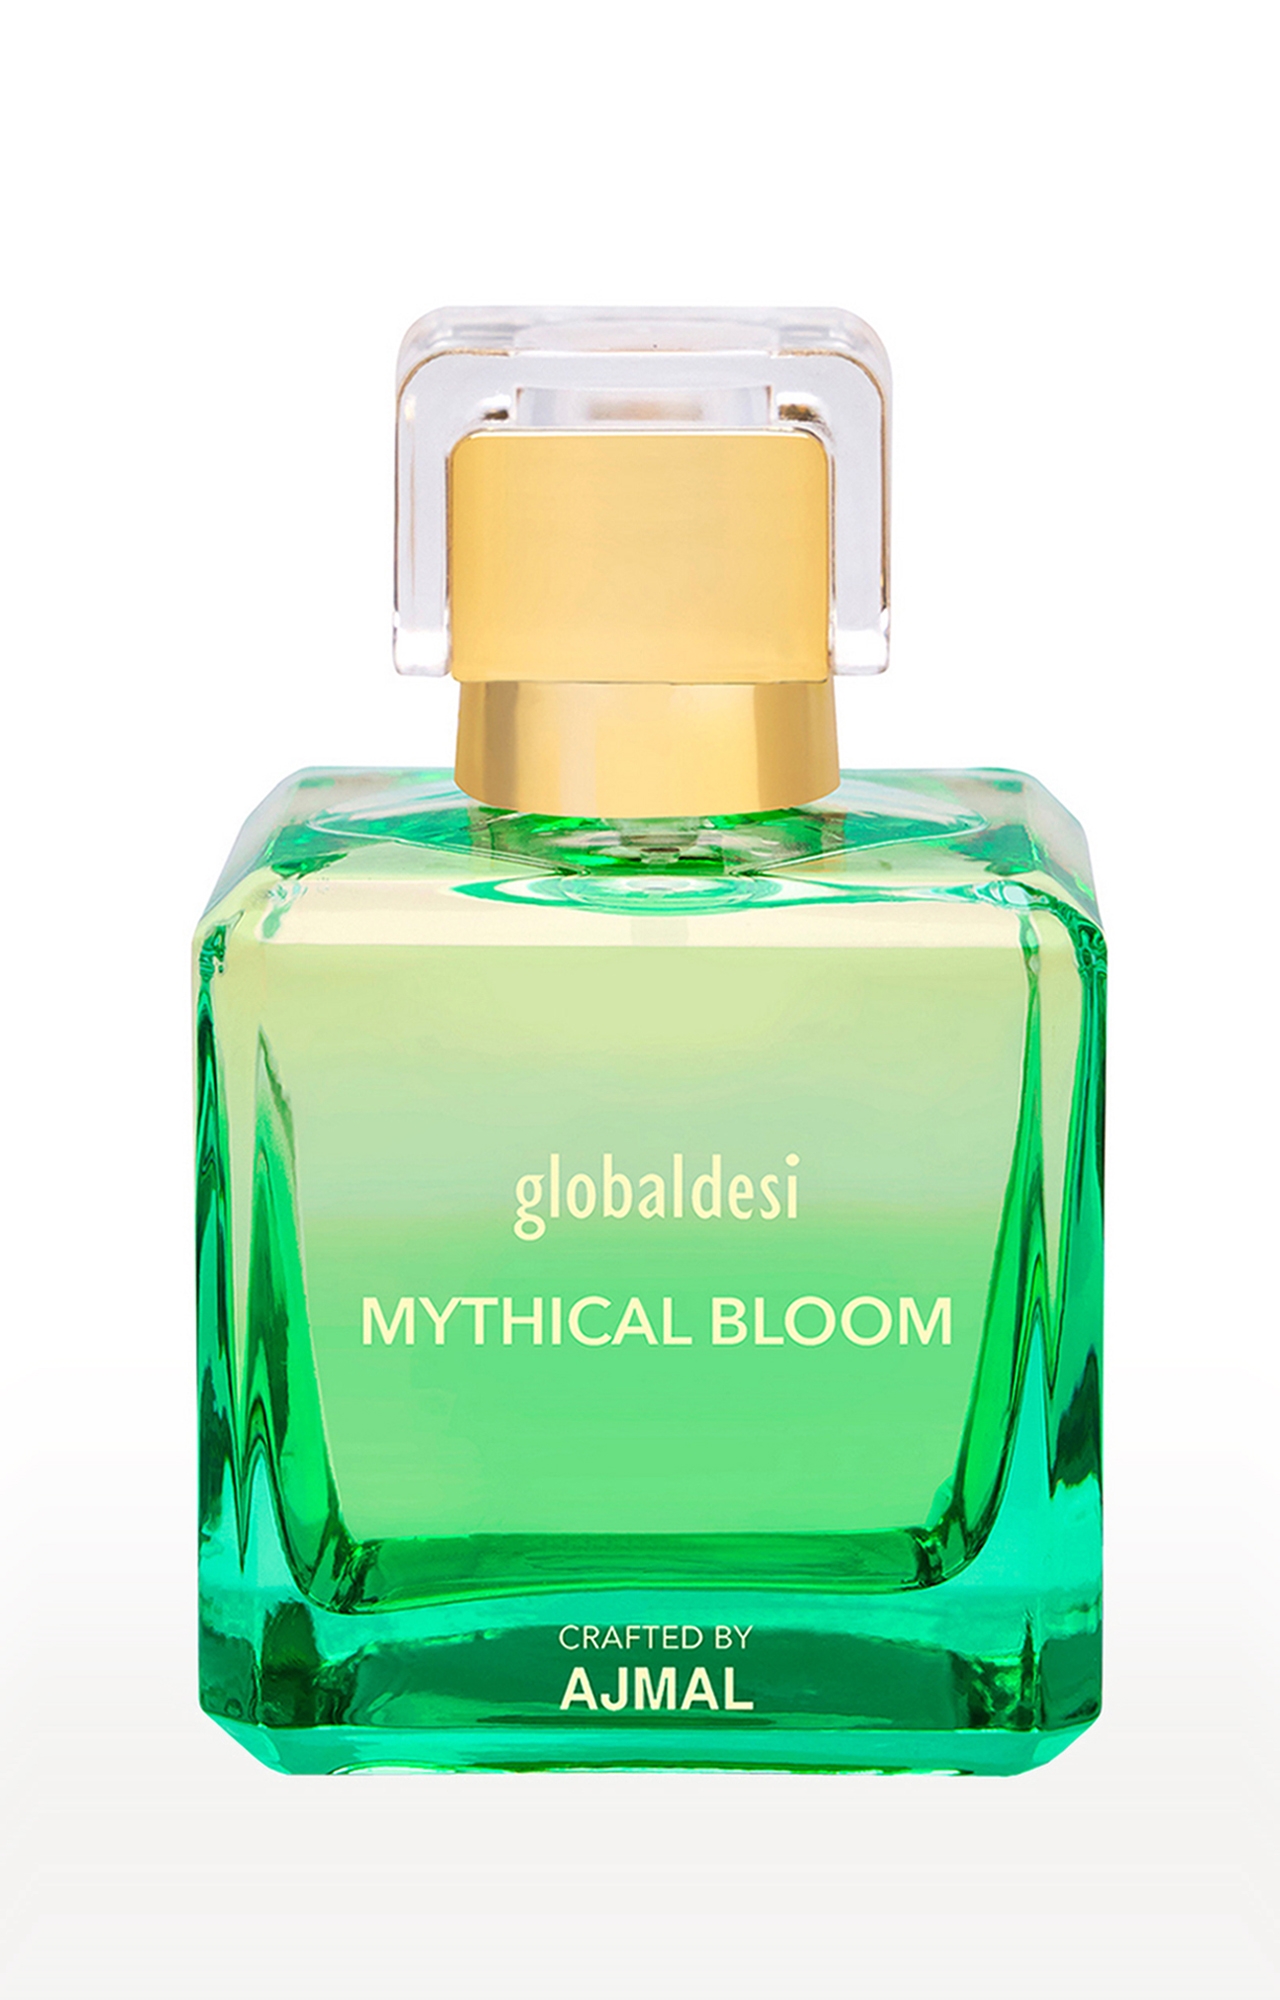 Global Desi Crafted By Ajmal | Global Mythical Bloom Trance Eau De Parfum 100ML Long Lasting Scent Spray Gift For Women Crafted By Ajmal 1